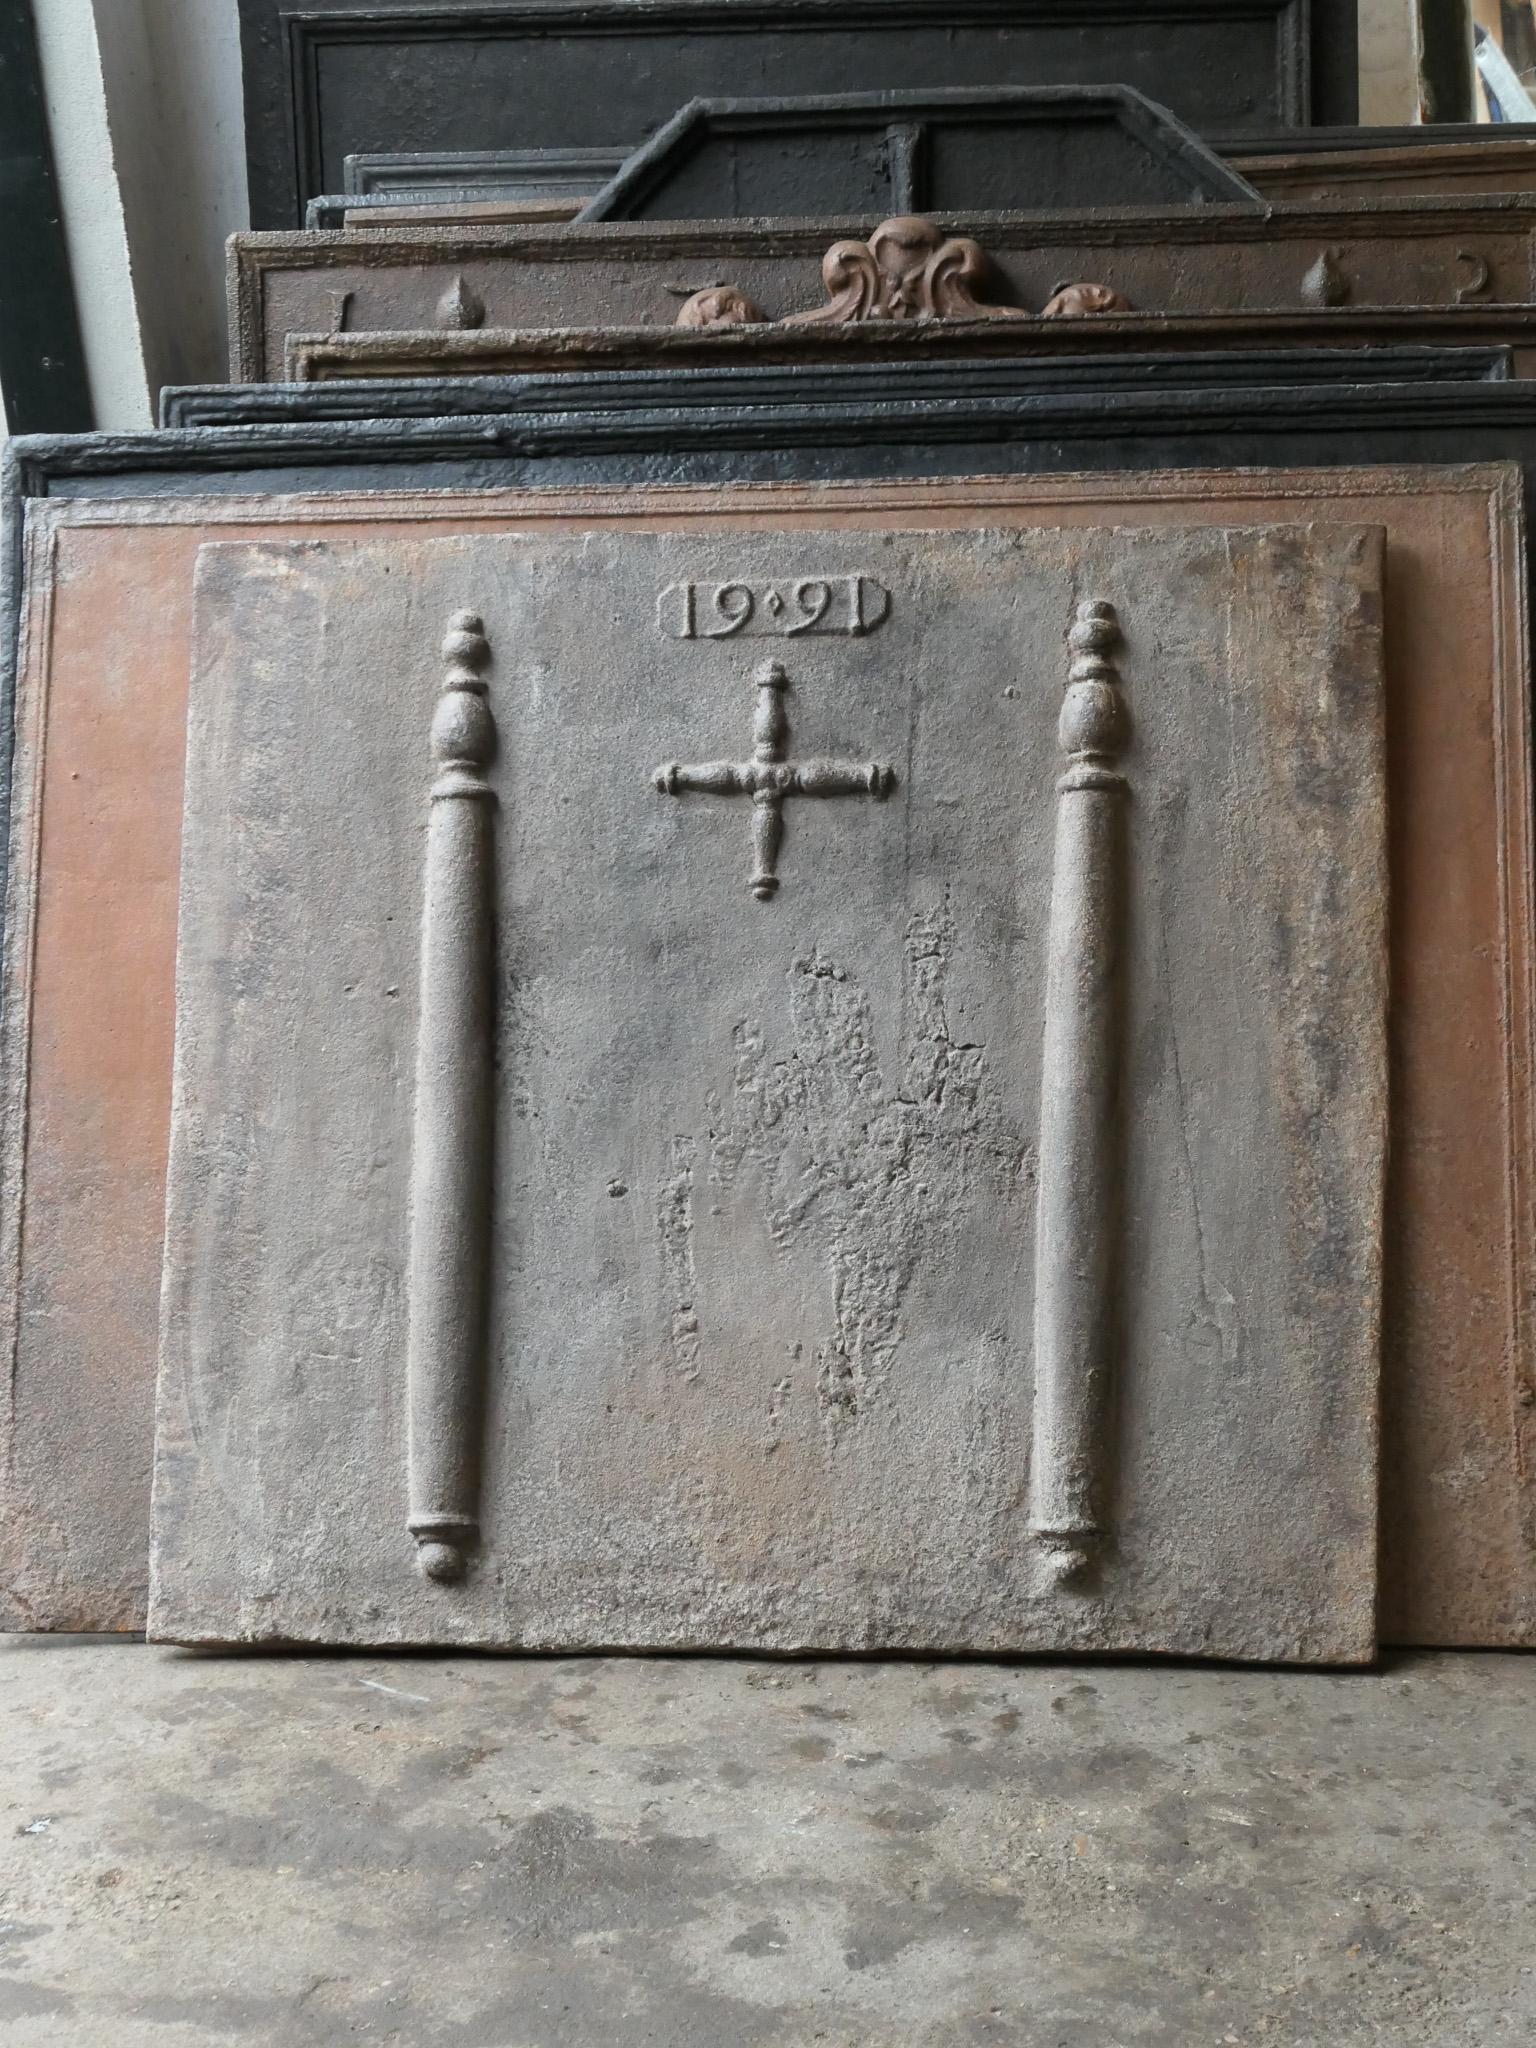 17th century French fireback with a Saint Andrew's cross and two pillars of Hercules. Saint Andrew is said to have been martyred on a cross in this shape. As a result the cross became a sign for humility and sacrifice. The pillars of Hercules